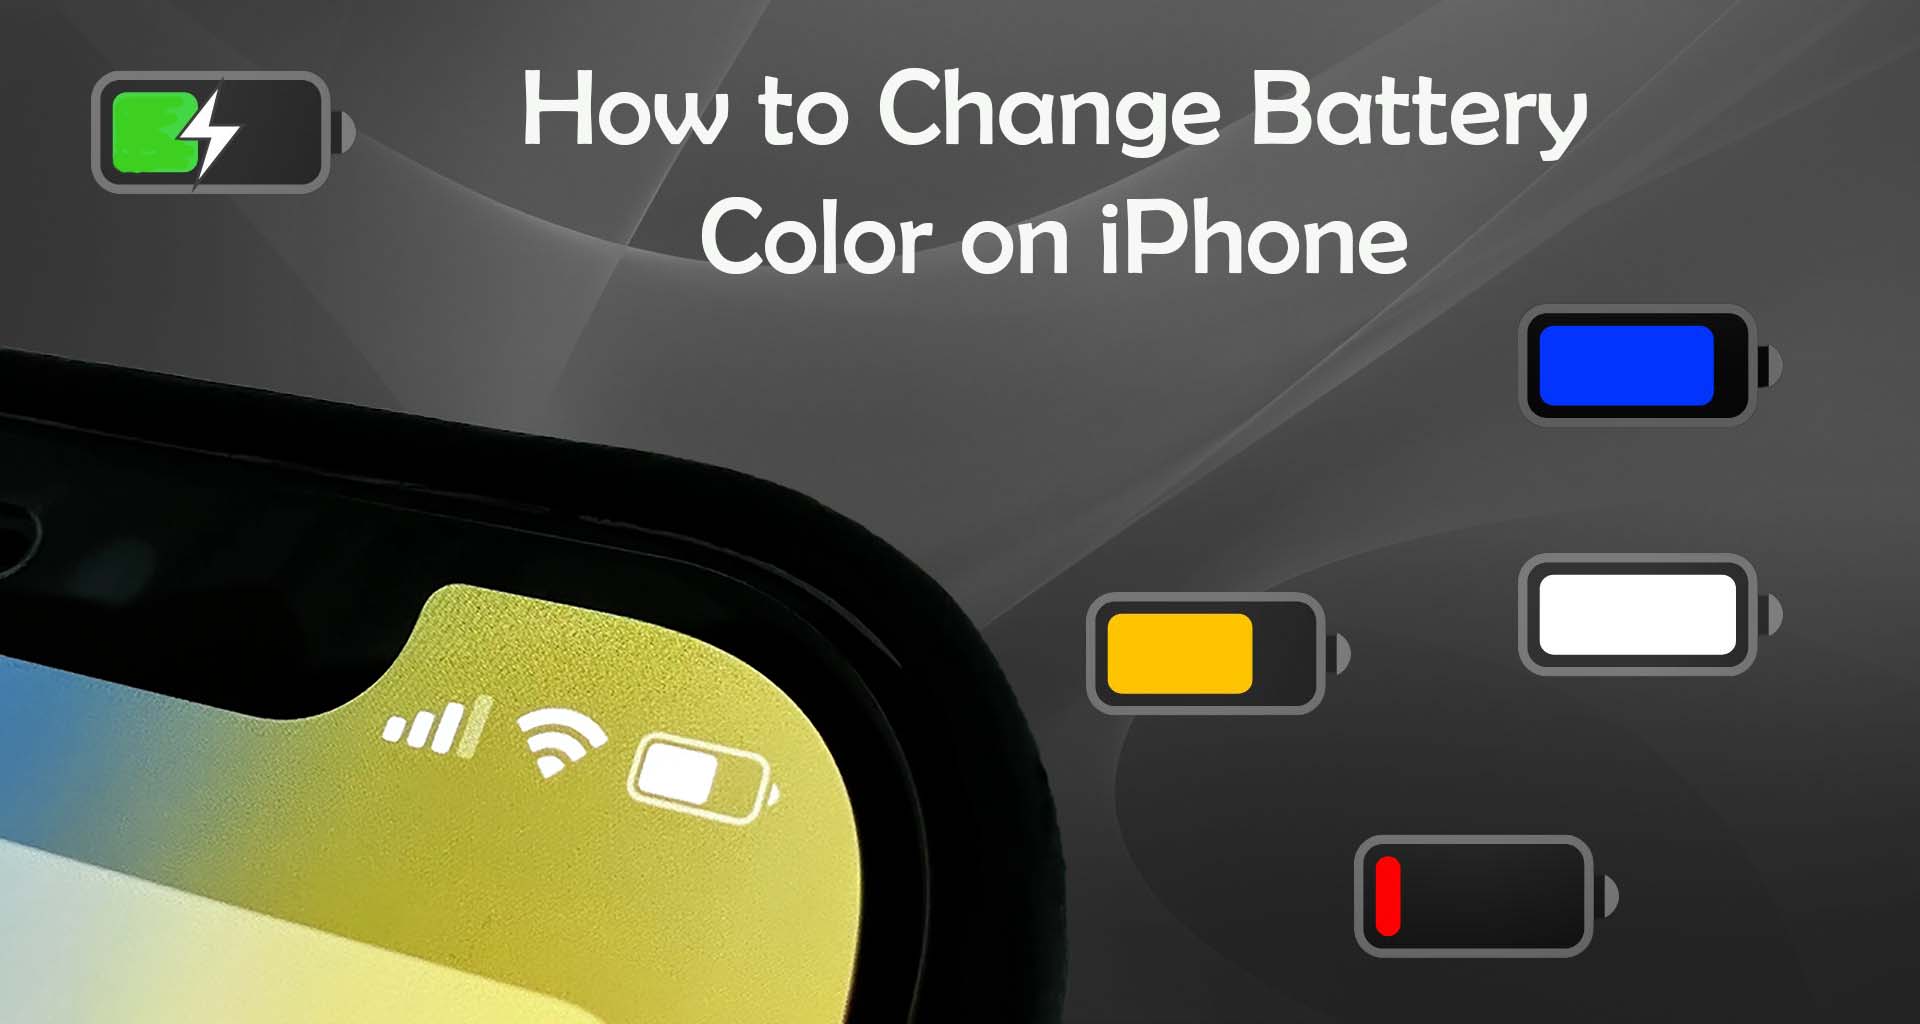 How to Change Battery Color on iPhone